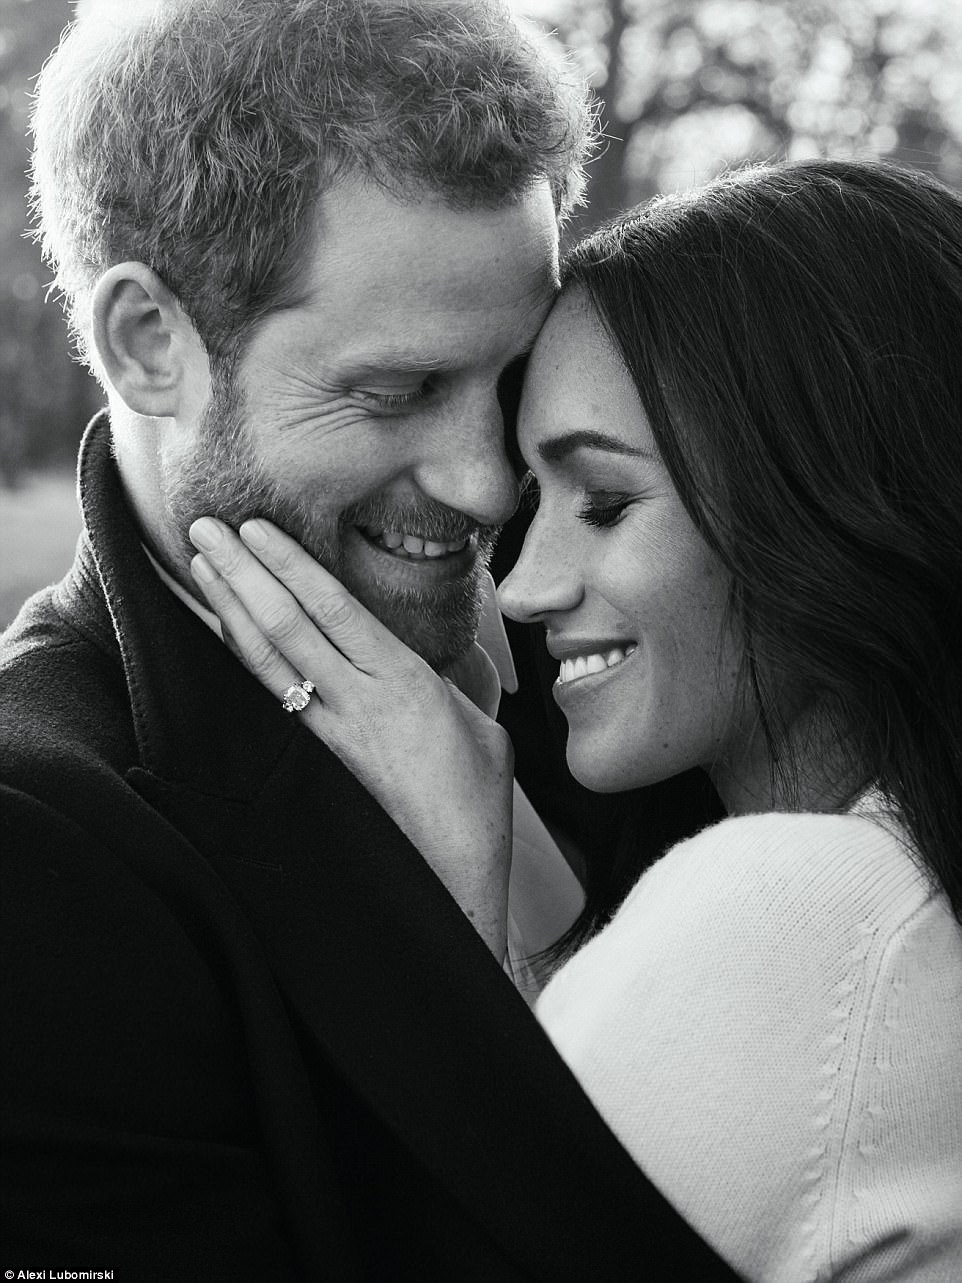 477F9C0000000578-5201959-Harry_and_Meghan_released_the_official_engagement_portraits_almo-a-126_1513860094051.jpg